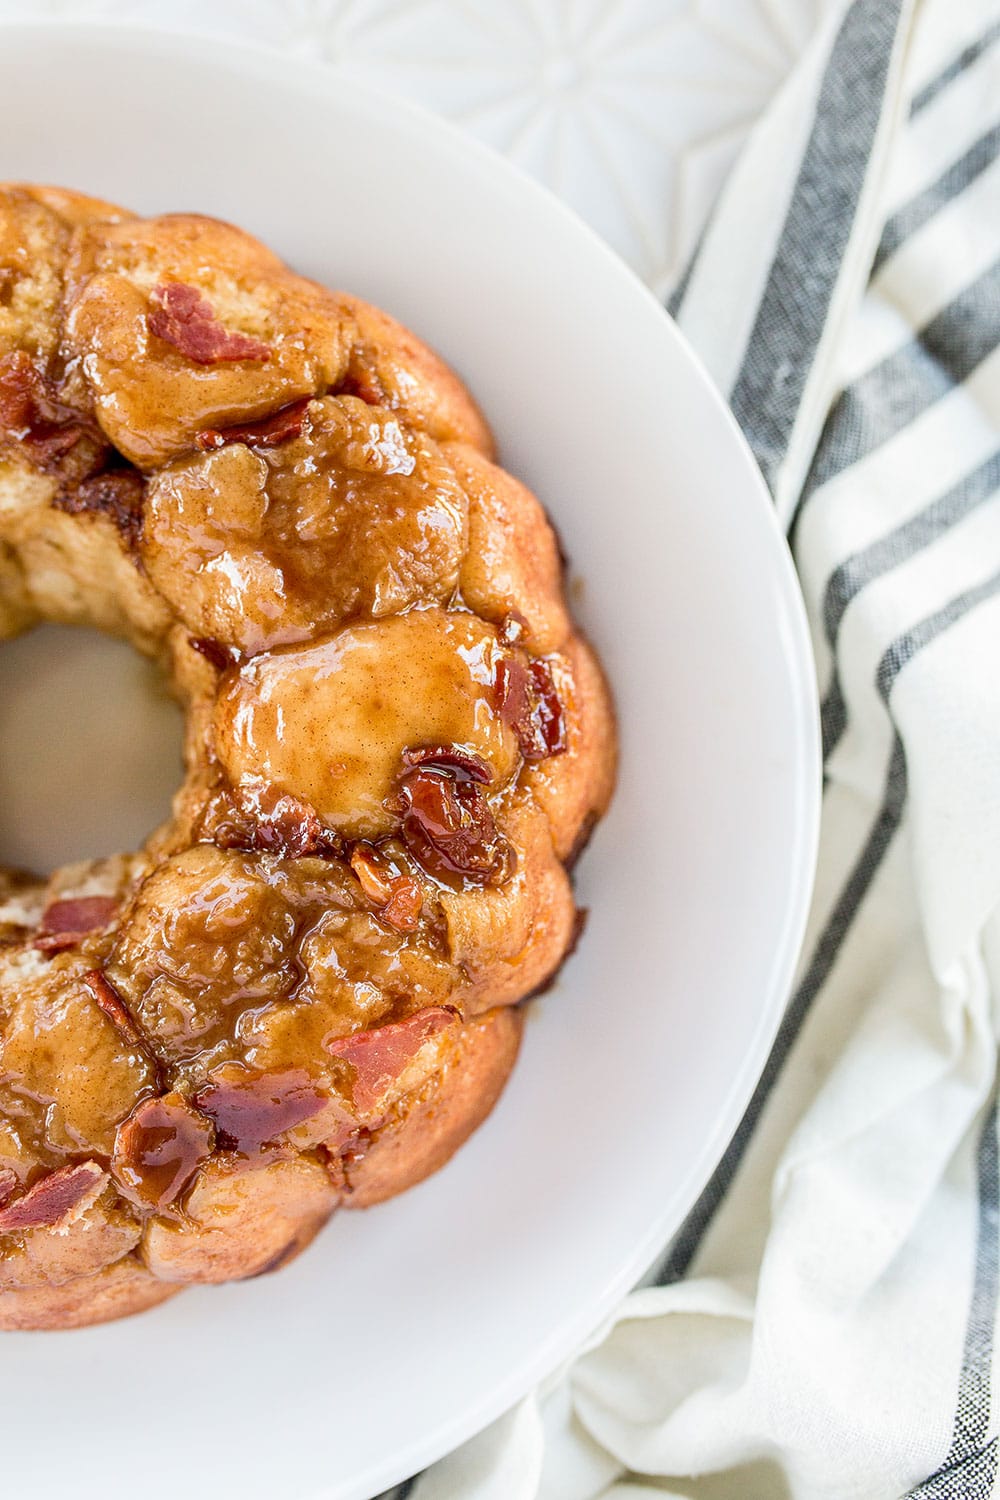 Insanely rich and gooey Maple Bacon Monkey Bread is loaded with sweet cinnamon, maple syrup, and tons of crisp bacon for the ultimate decadent treat.